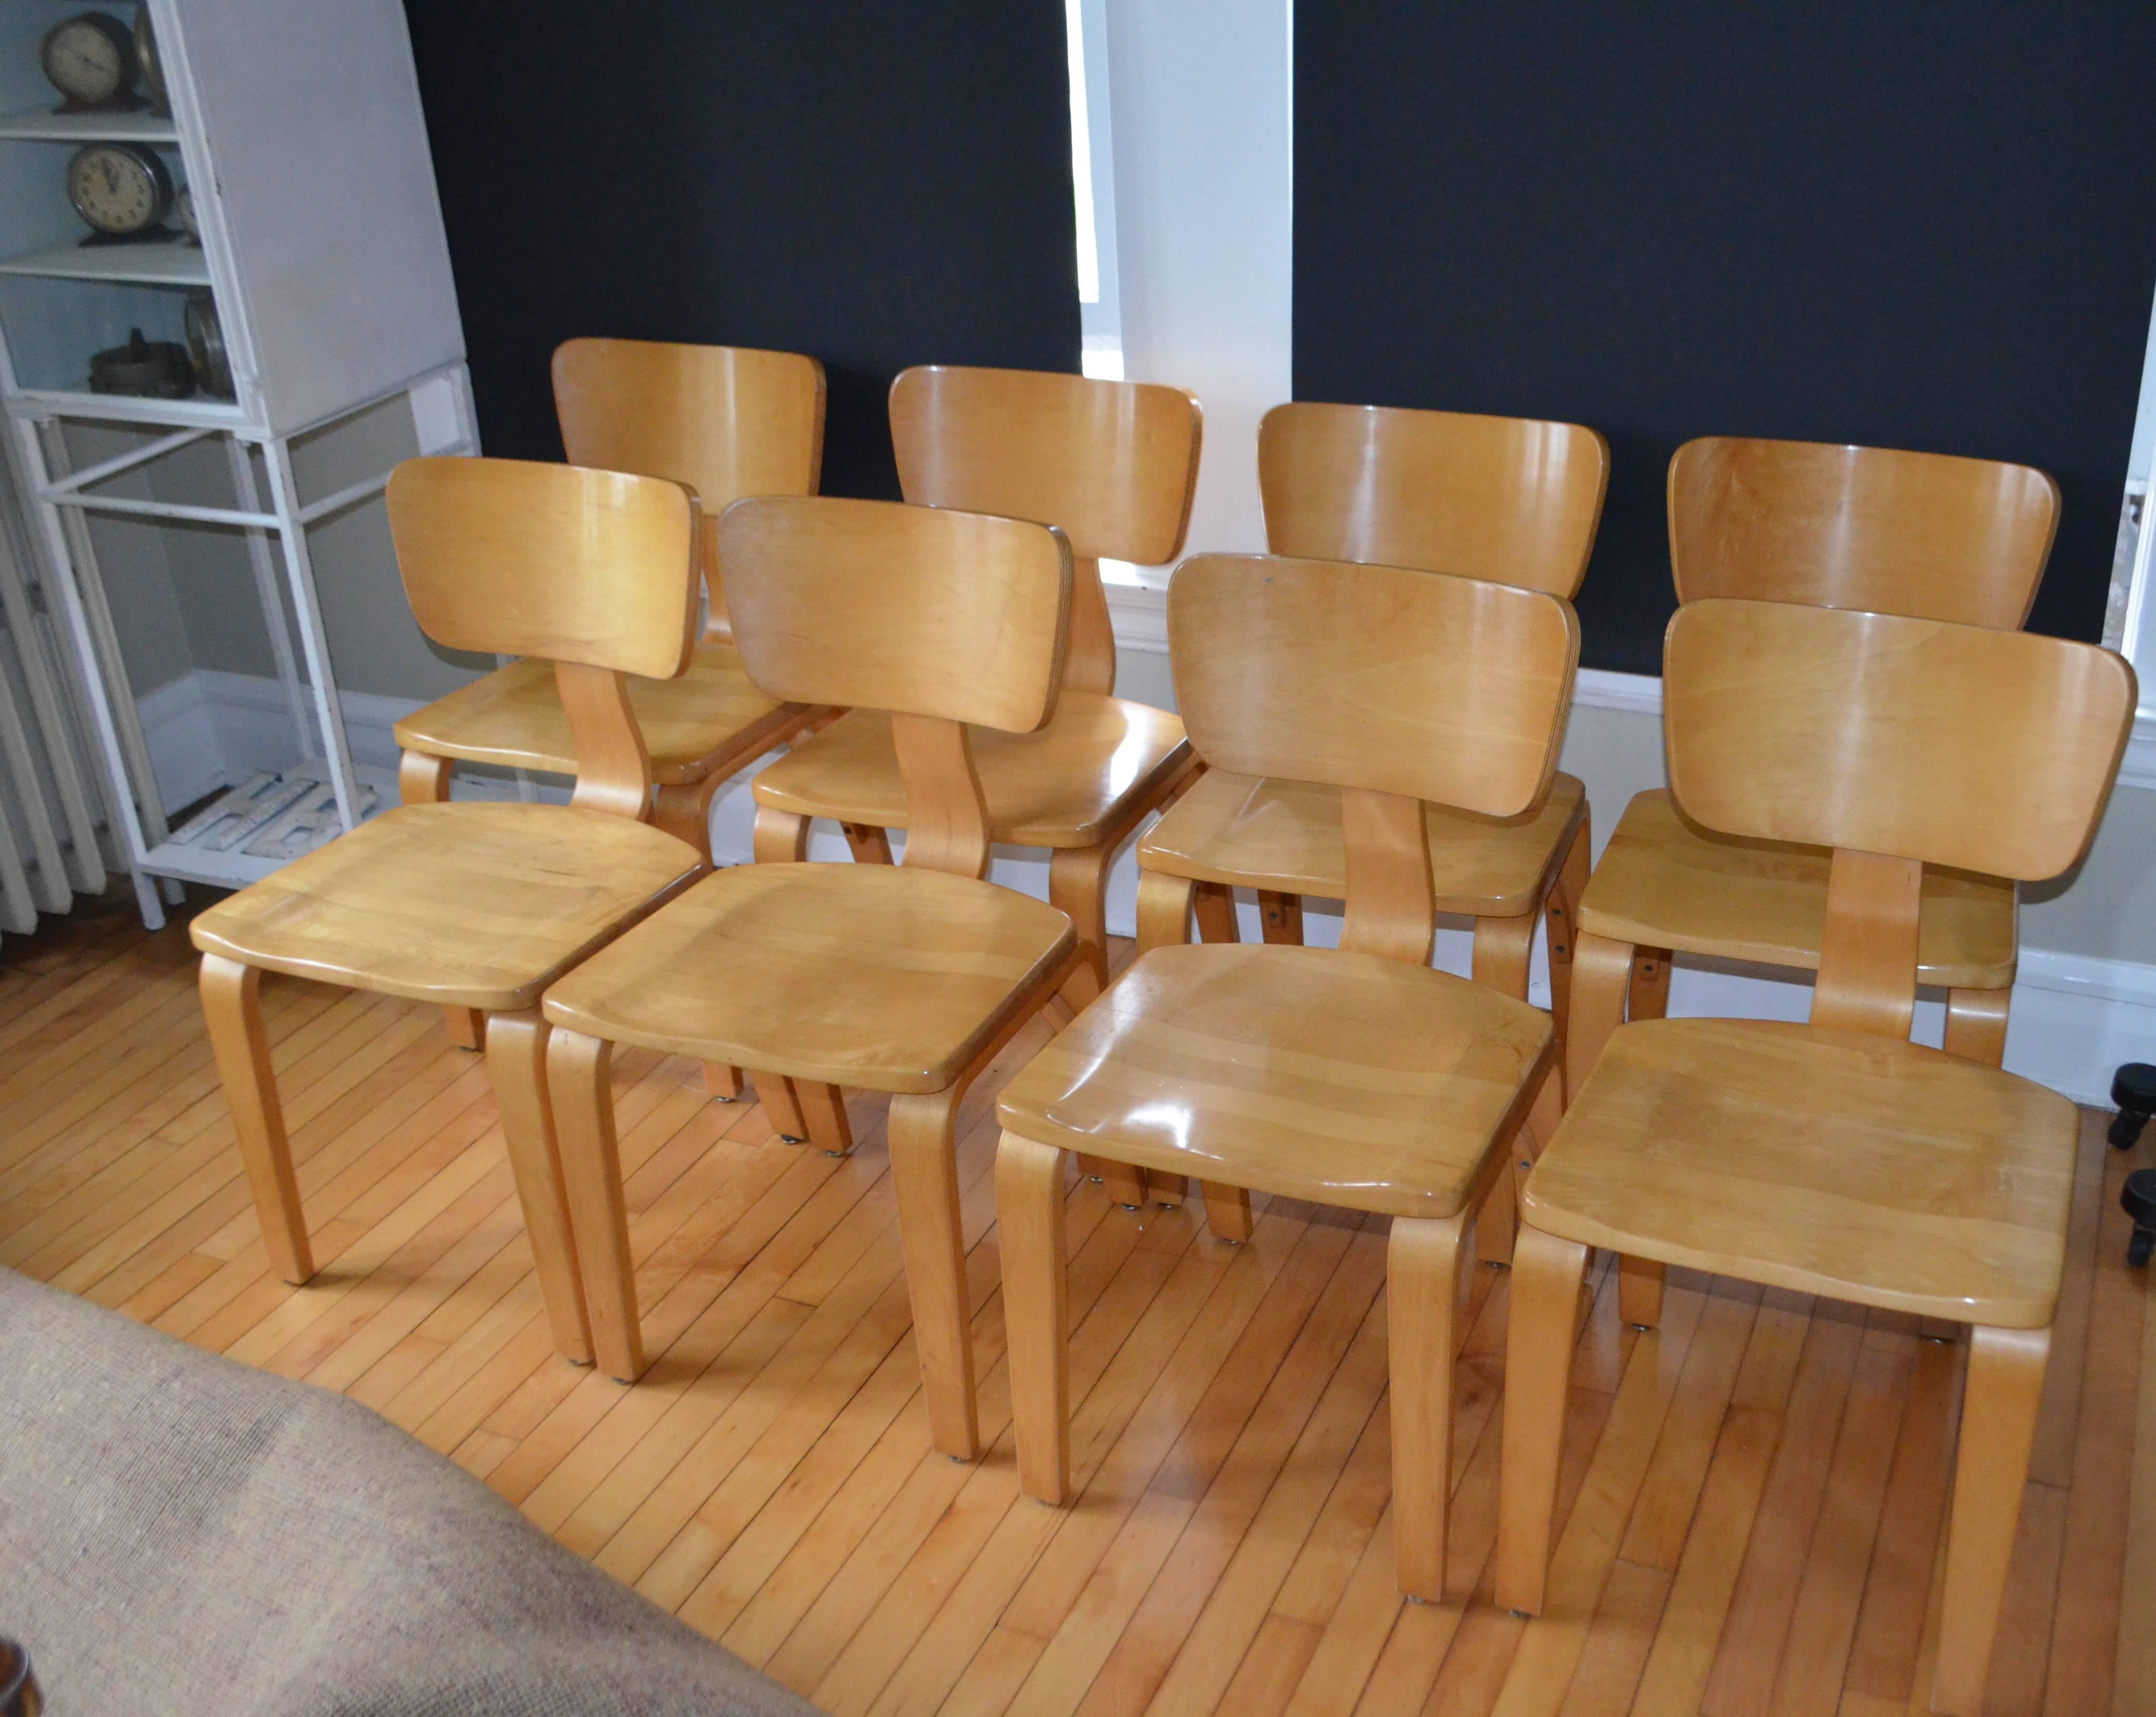 Thonet dining chairs of rock maple and bent ply, set of eight.
Founded by a German cabinetmaker in the early 1800s, Thonet was the Pioneer and patent holder of the bentwood technique a process that uses heat and moisture to mold wood into